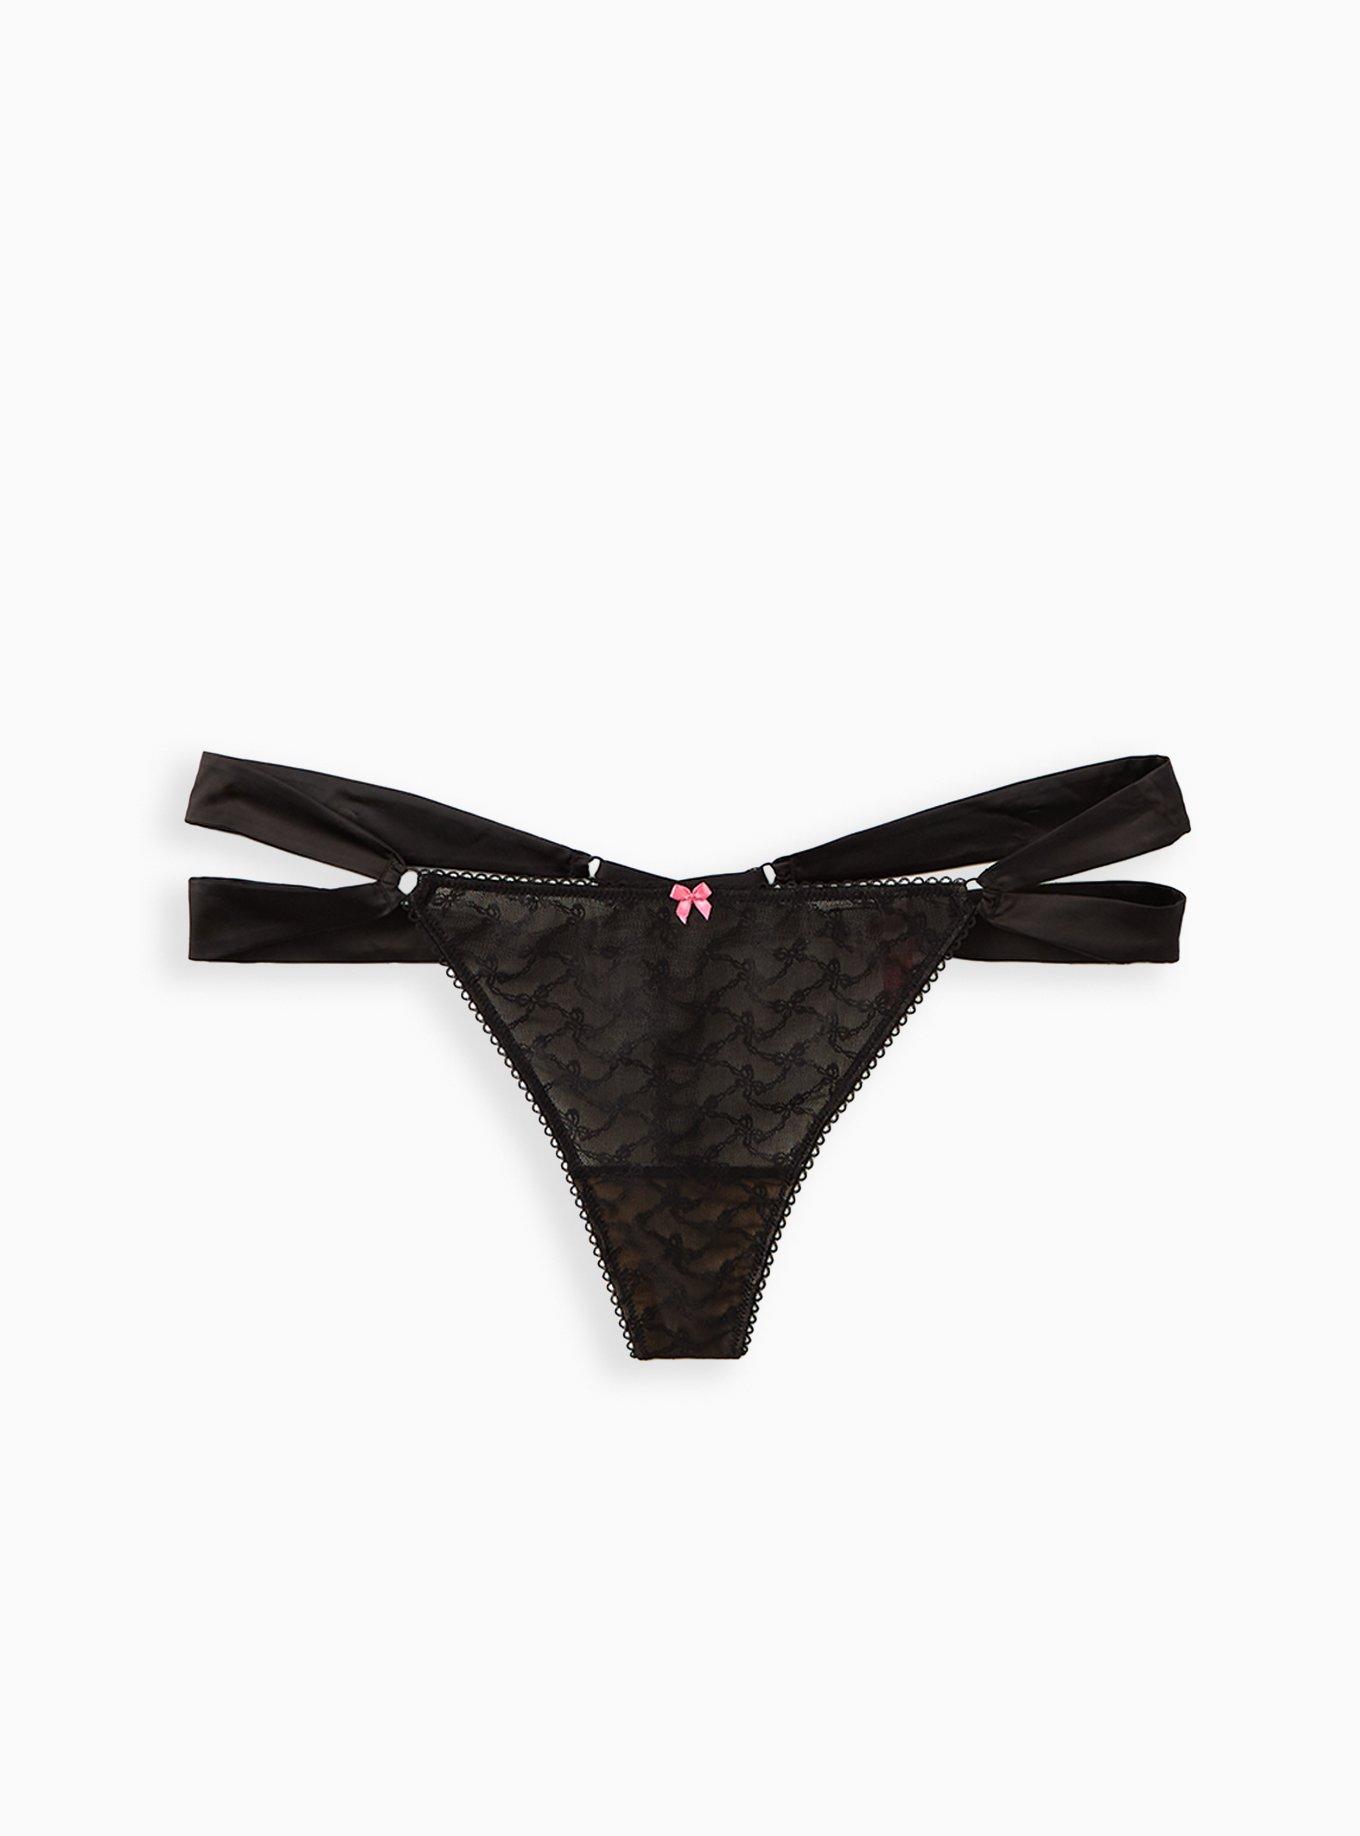 200-12 Thong Panty SALE (1 pc) 282 (black) buy at the best price